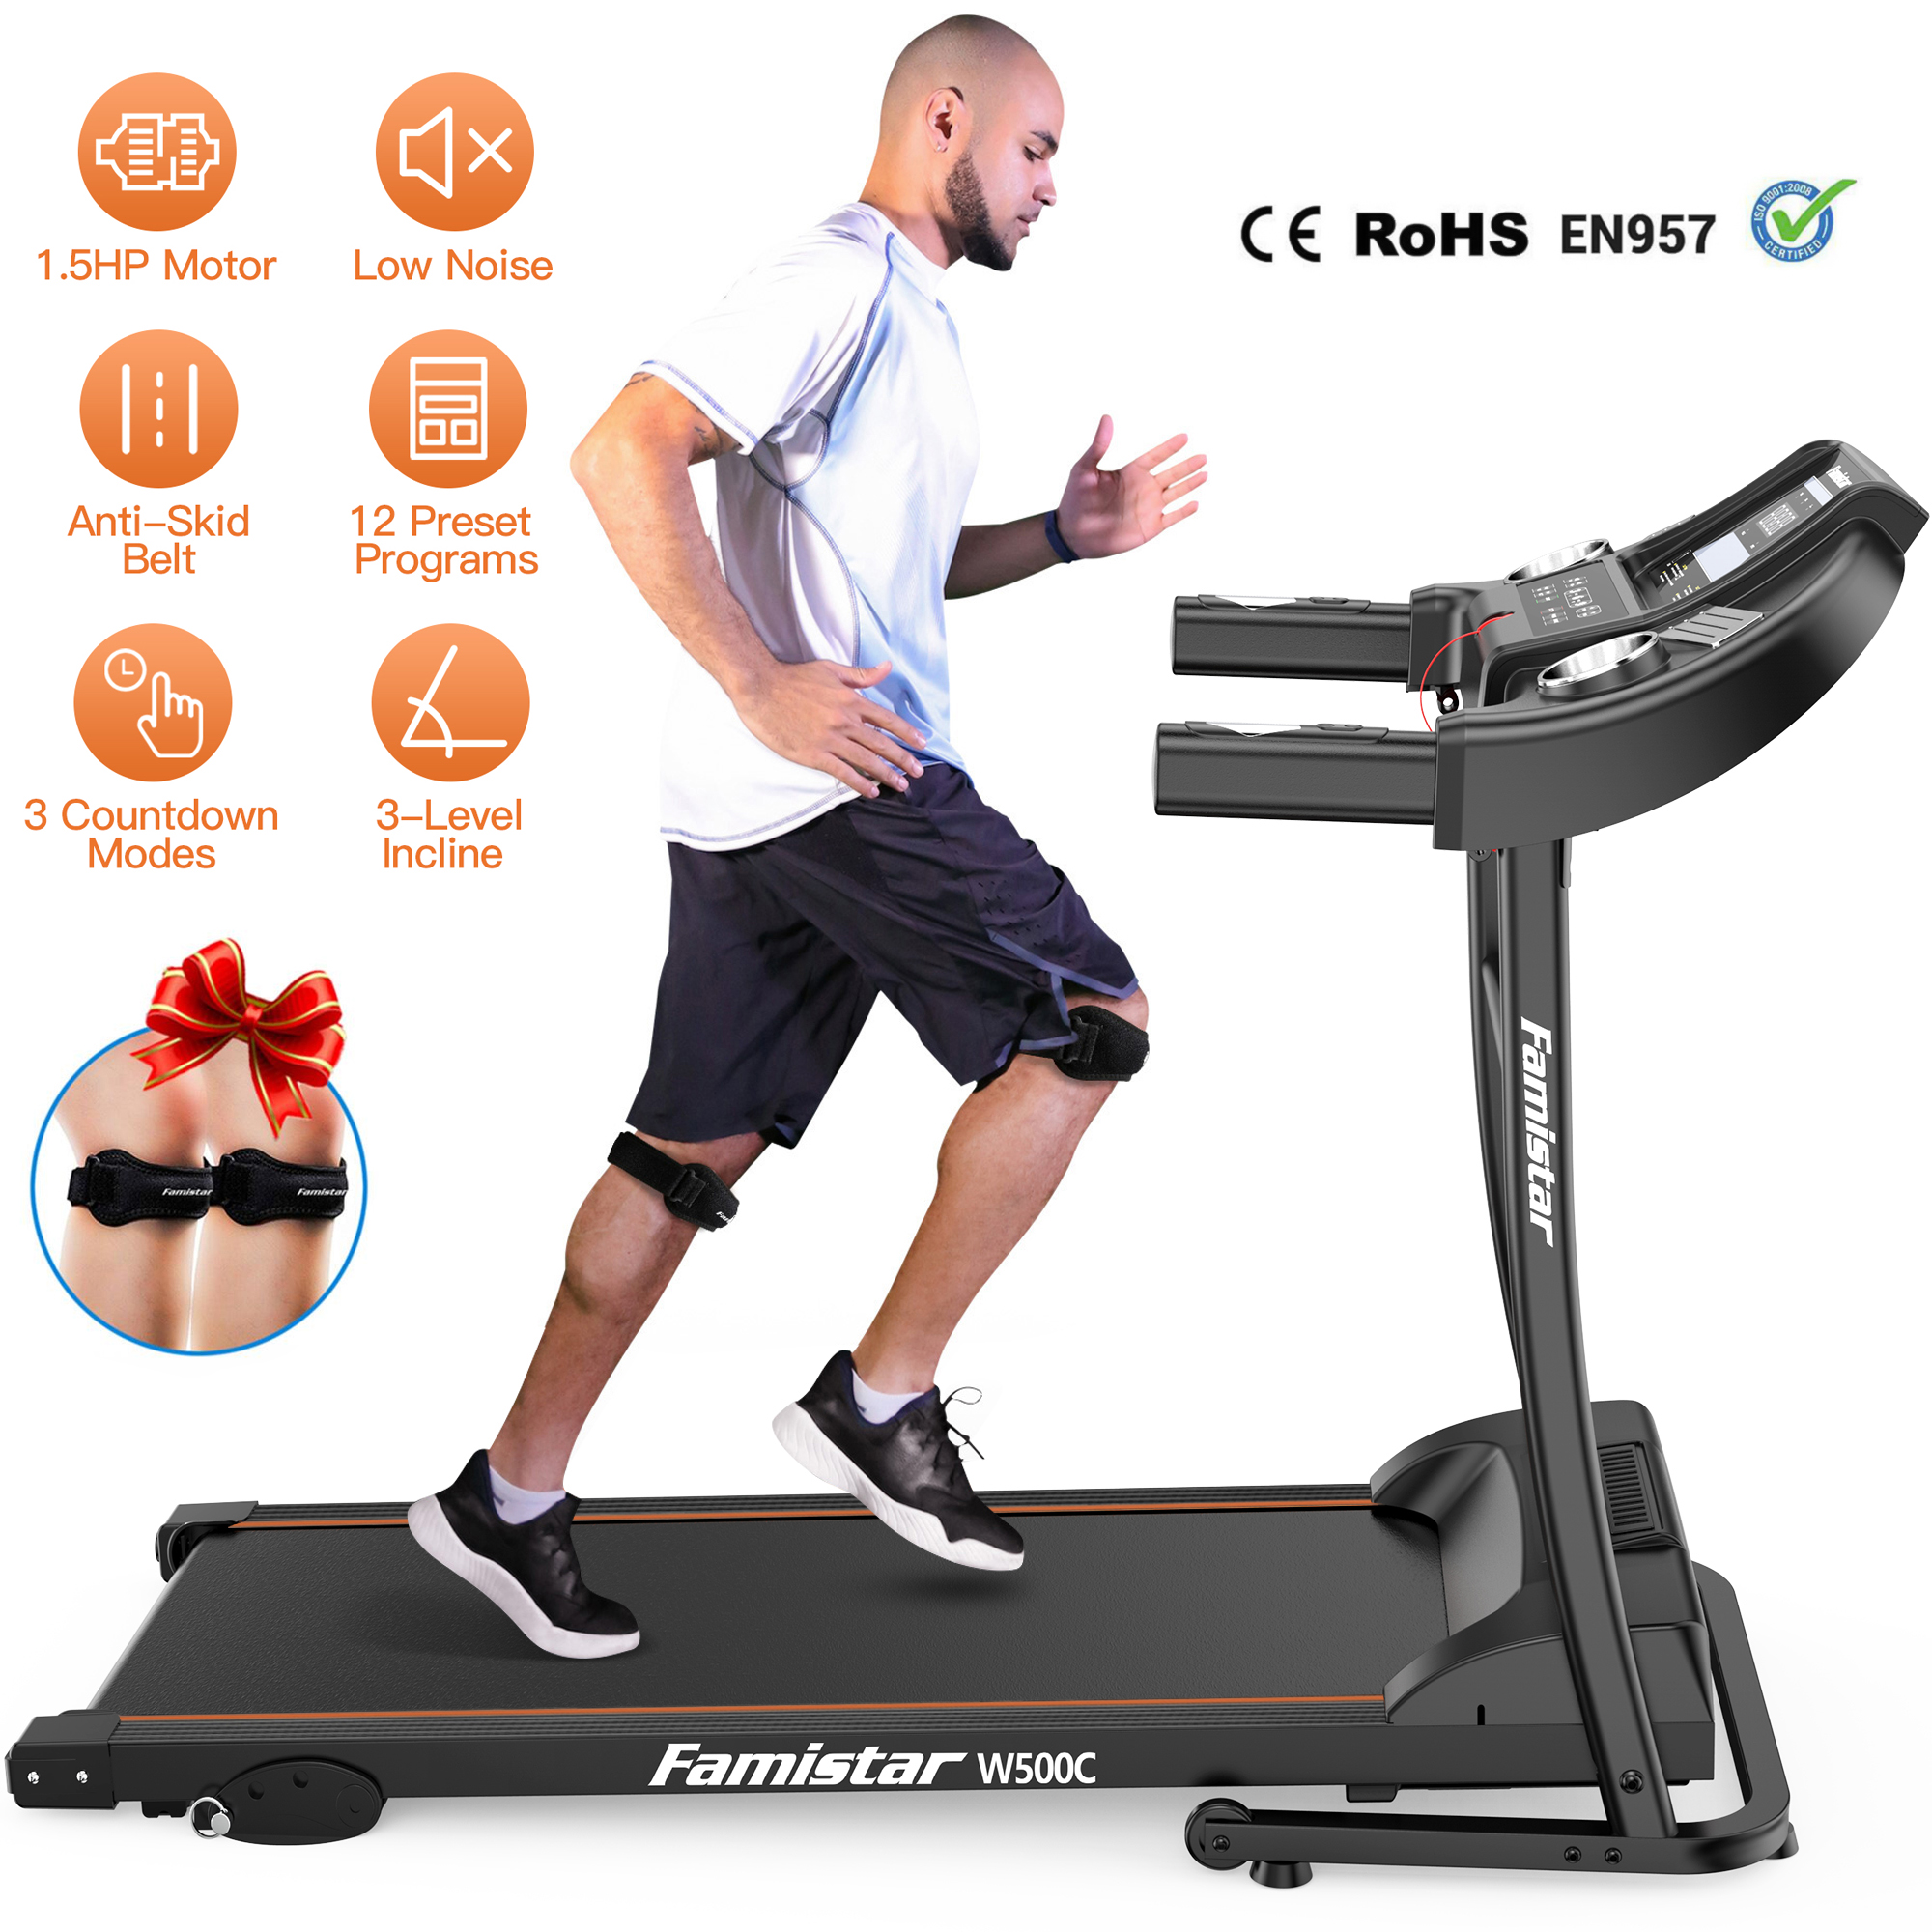 Famistar W500C 1.5HP Folding Electric Treadmill with 3 Level Manual Incline, Max 240LBS - image 4 of 11